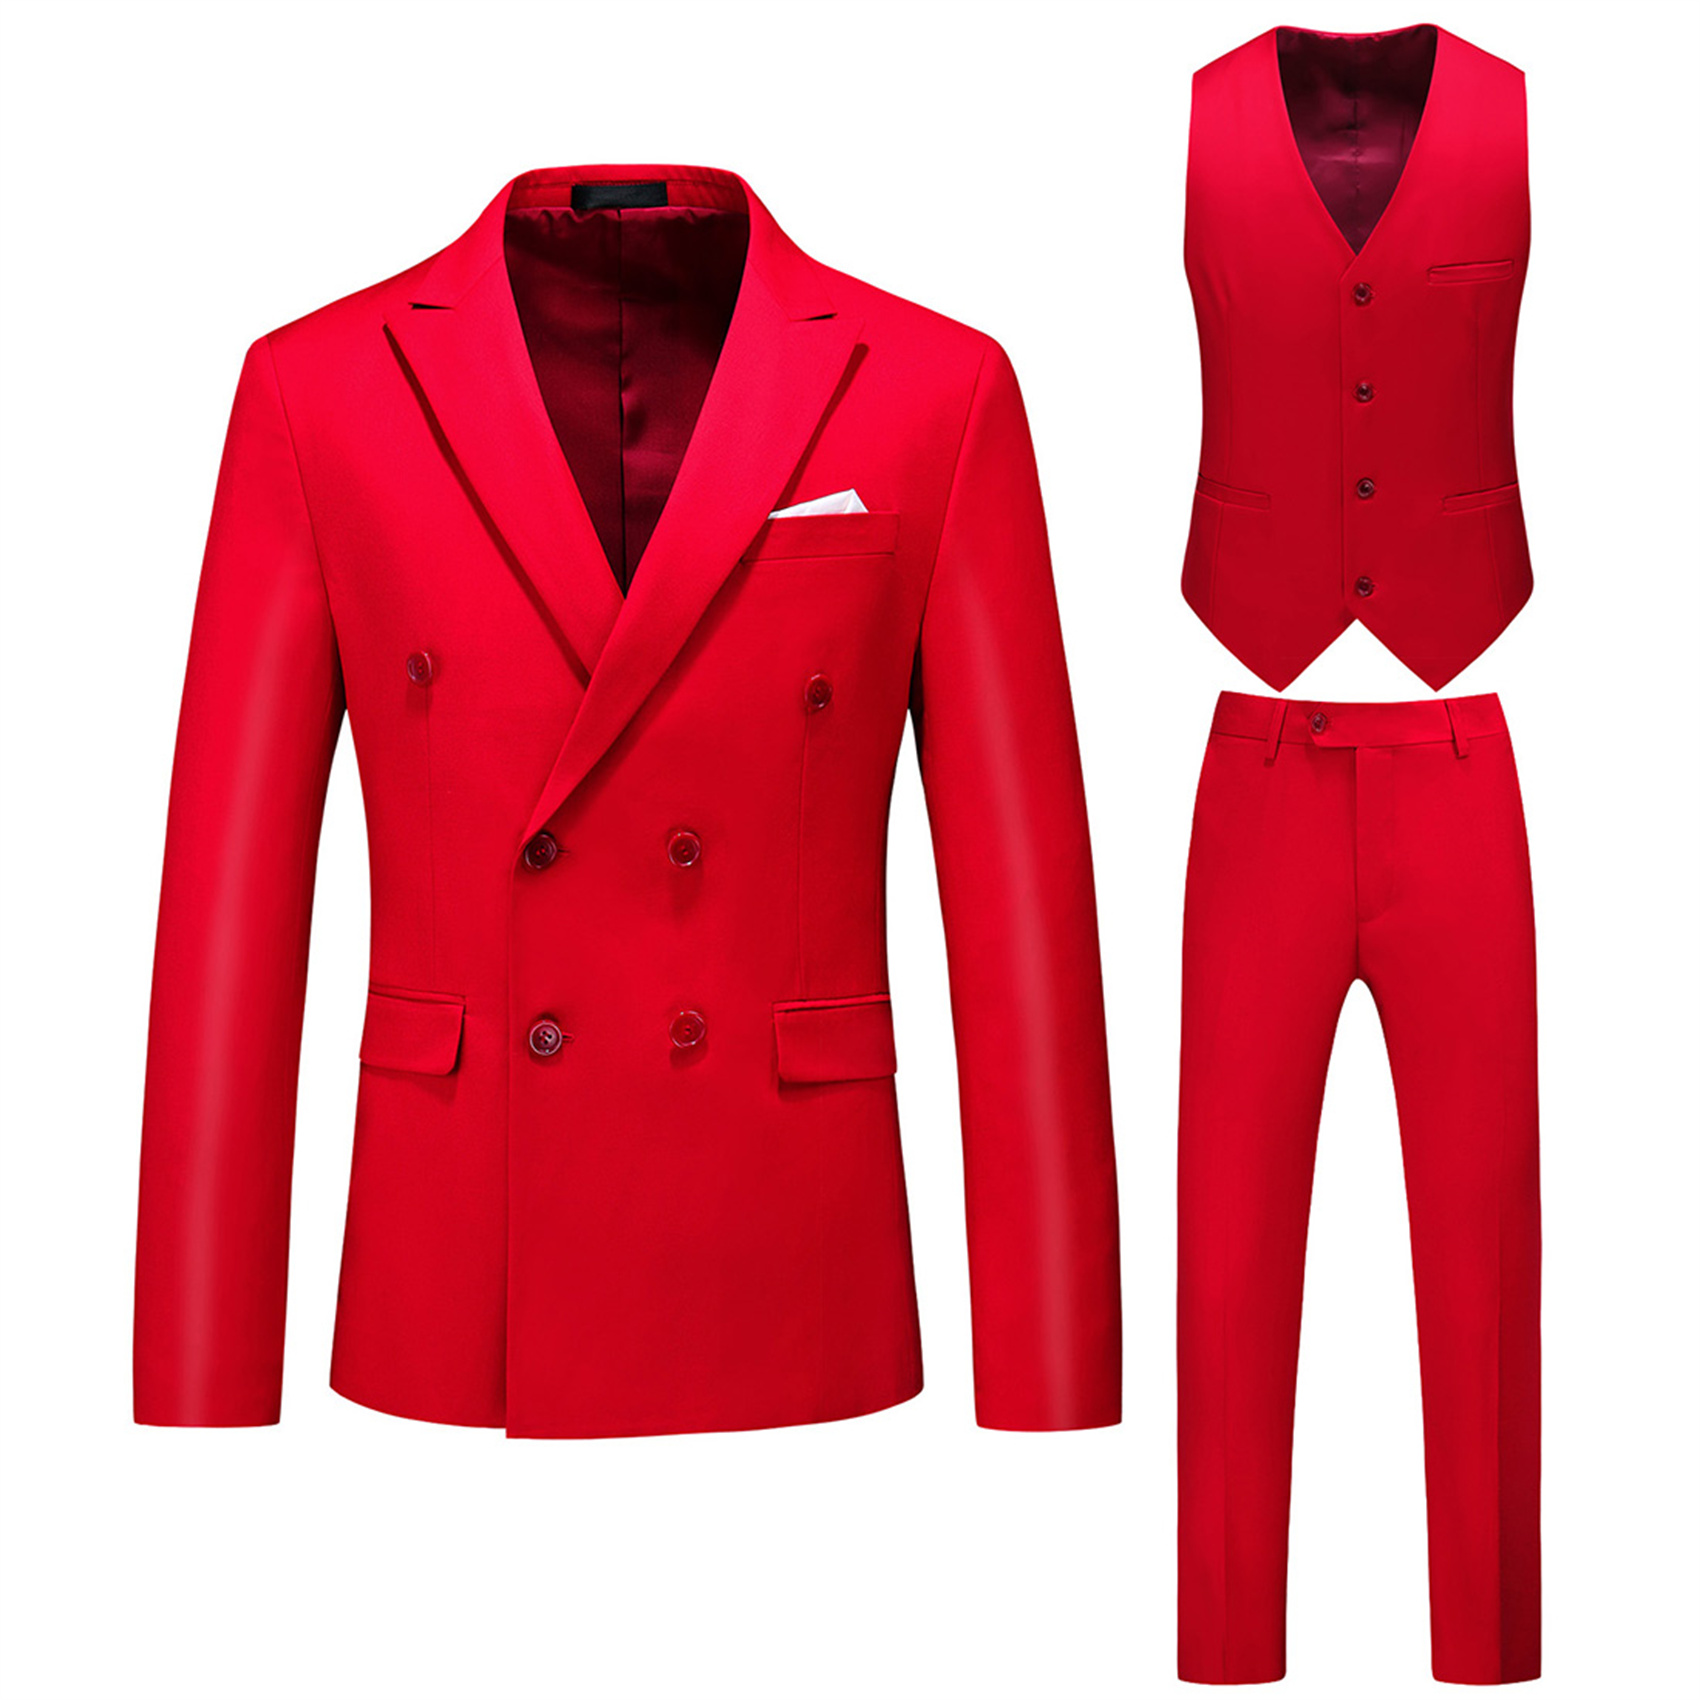 3 Piece Double Breasted Suit for Men, Slim Fit, Red